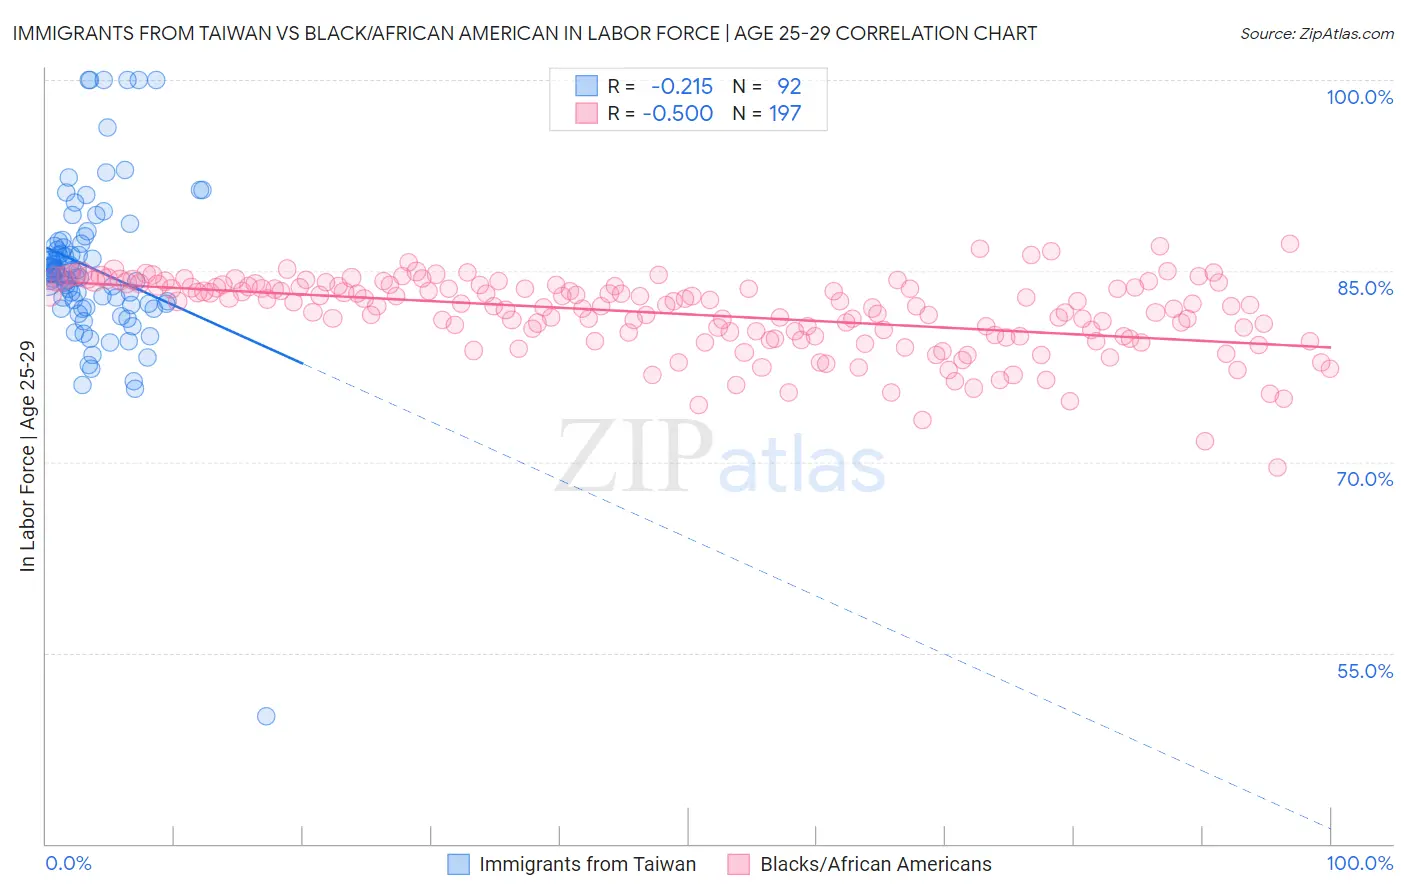 Immigrants from Taiwan vs Black/African American In Labor Force | Age 25-29